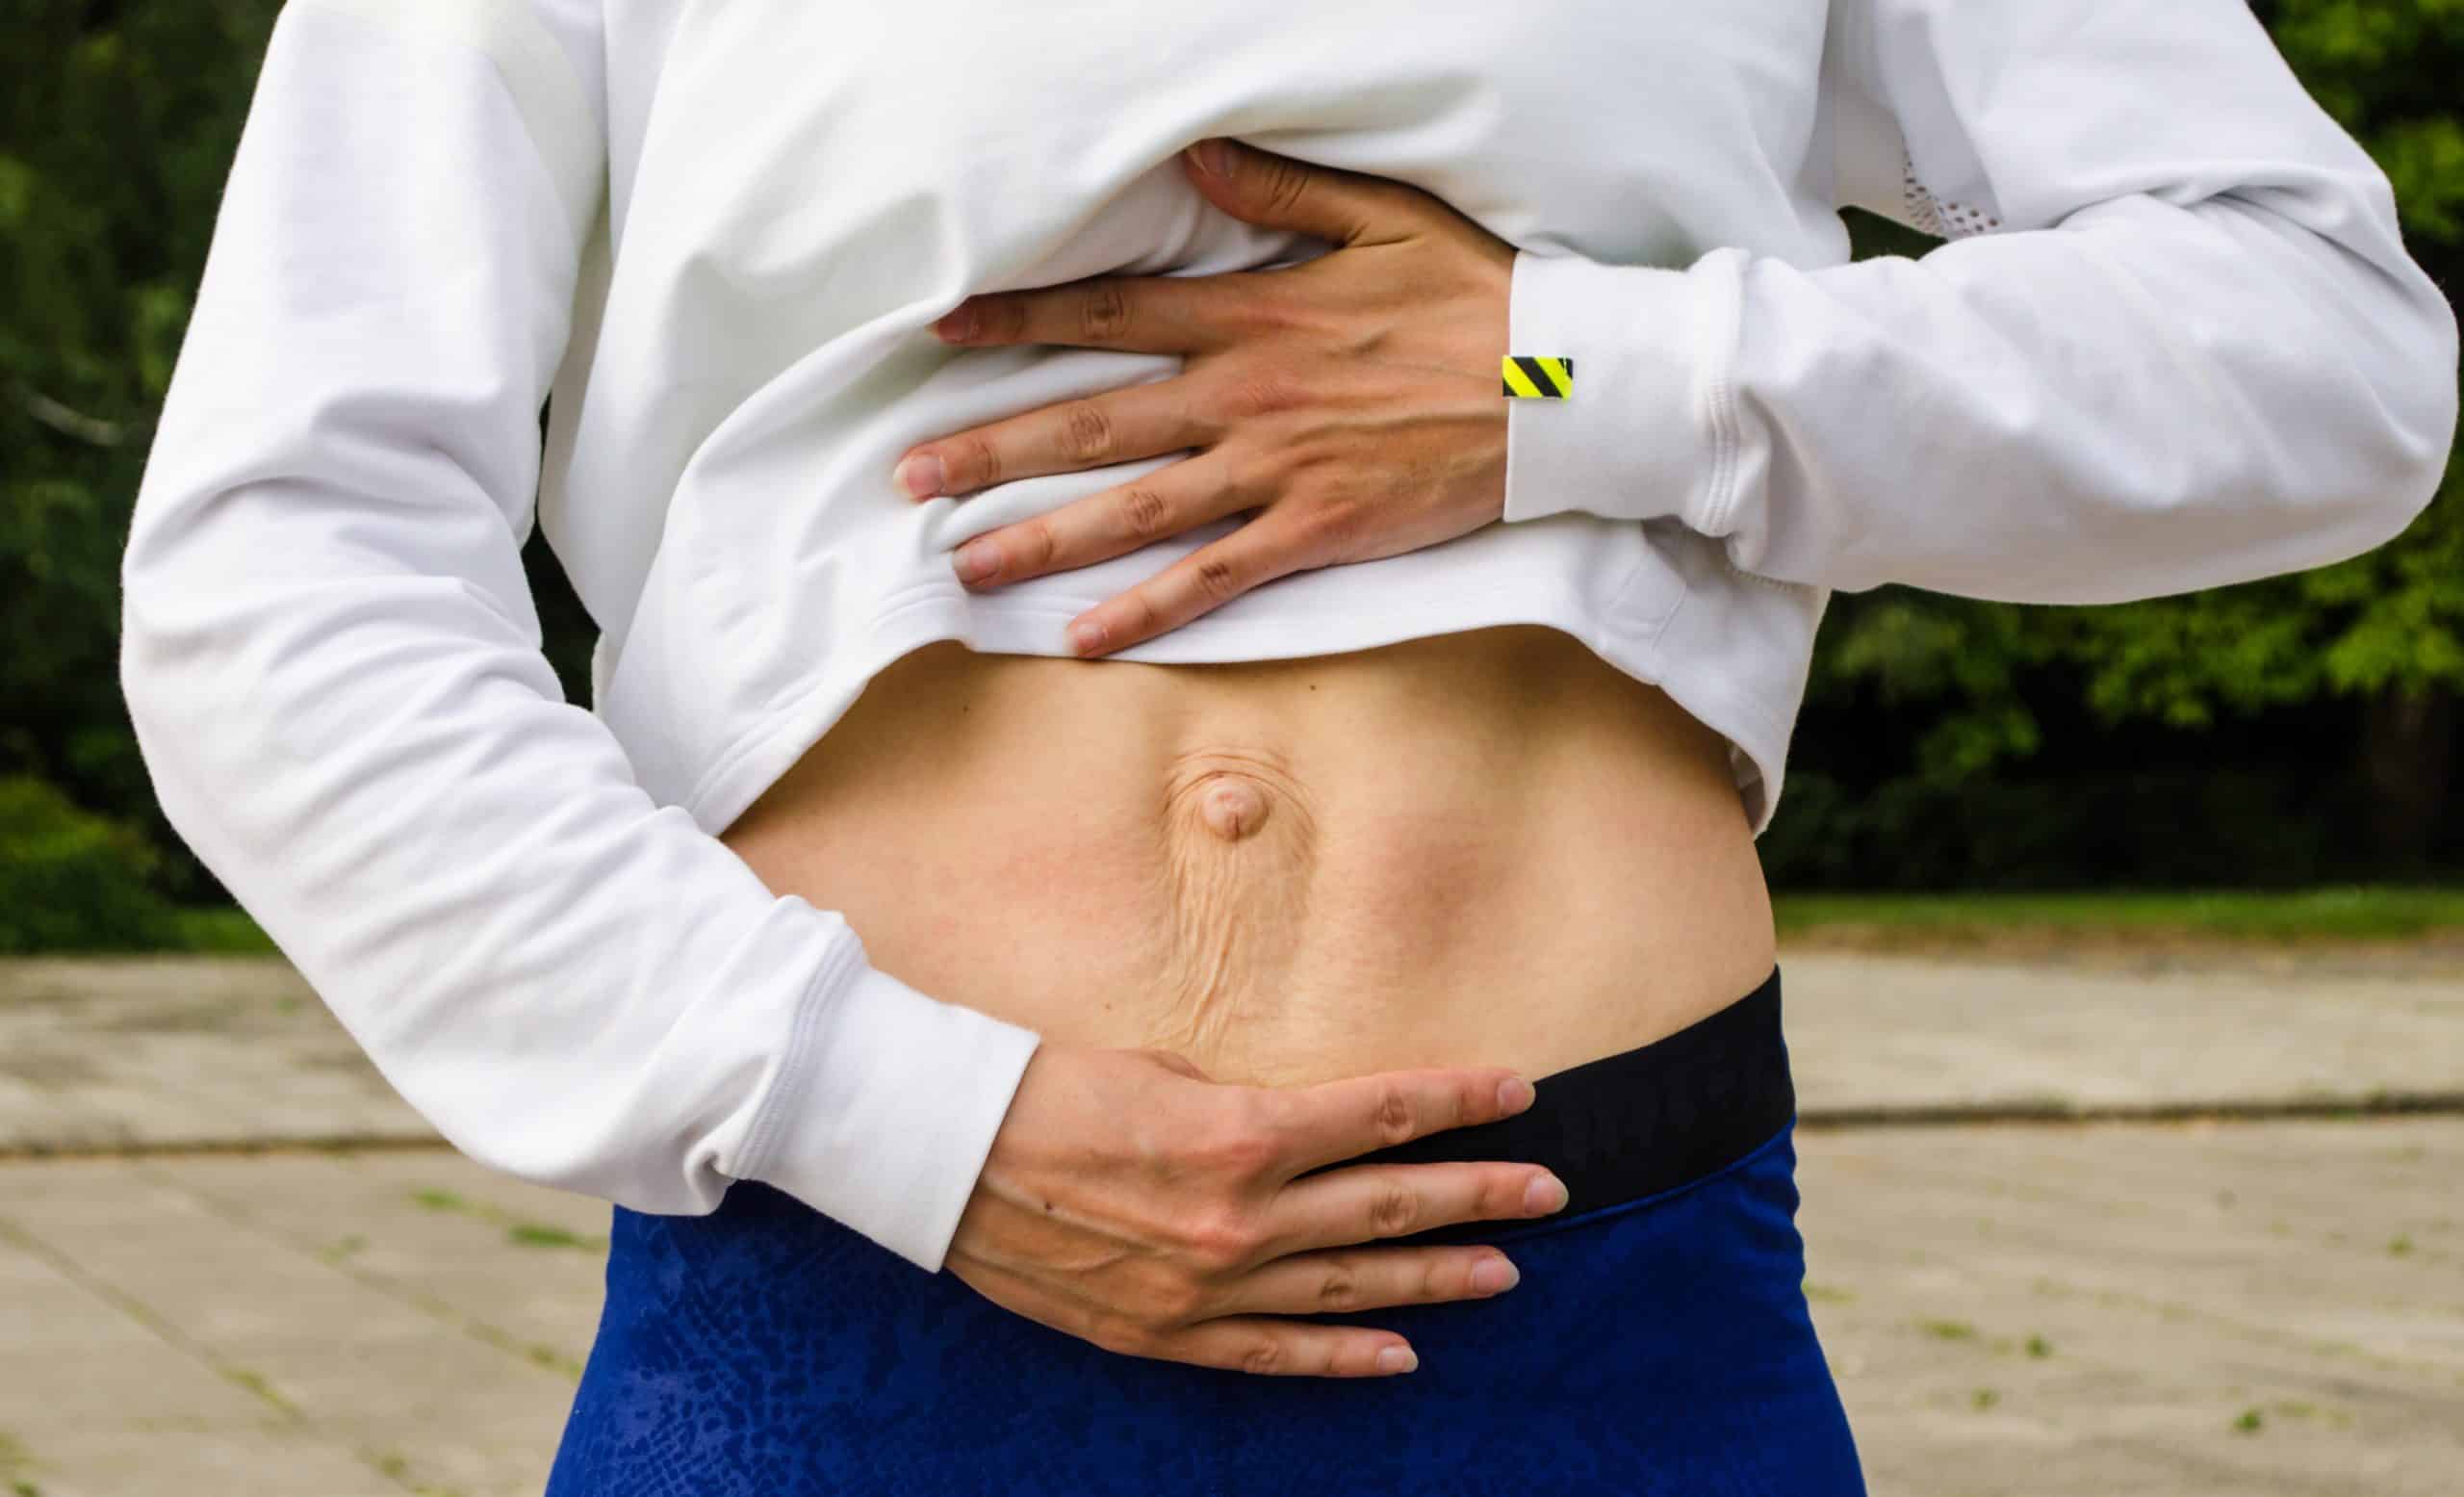 Why Do Men Get Abdominal Separation And Why Does It Lead To Back